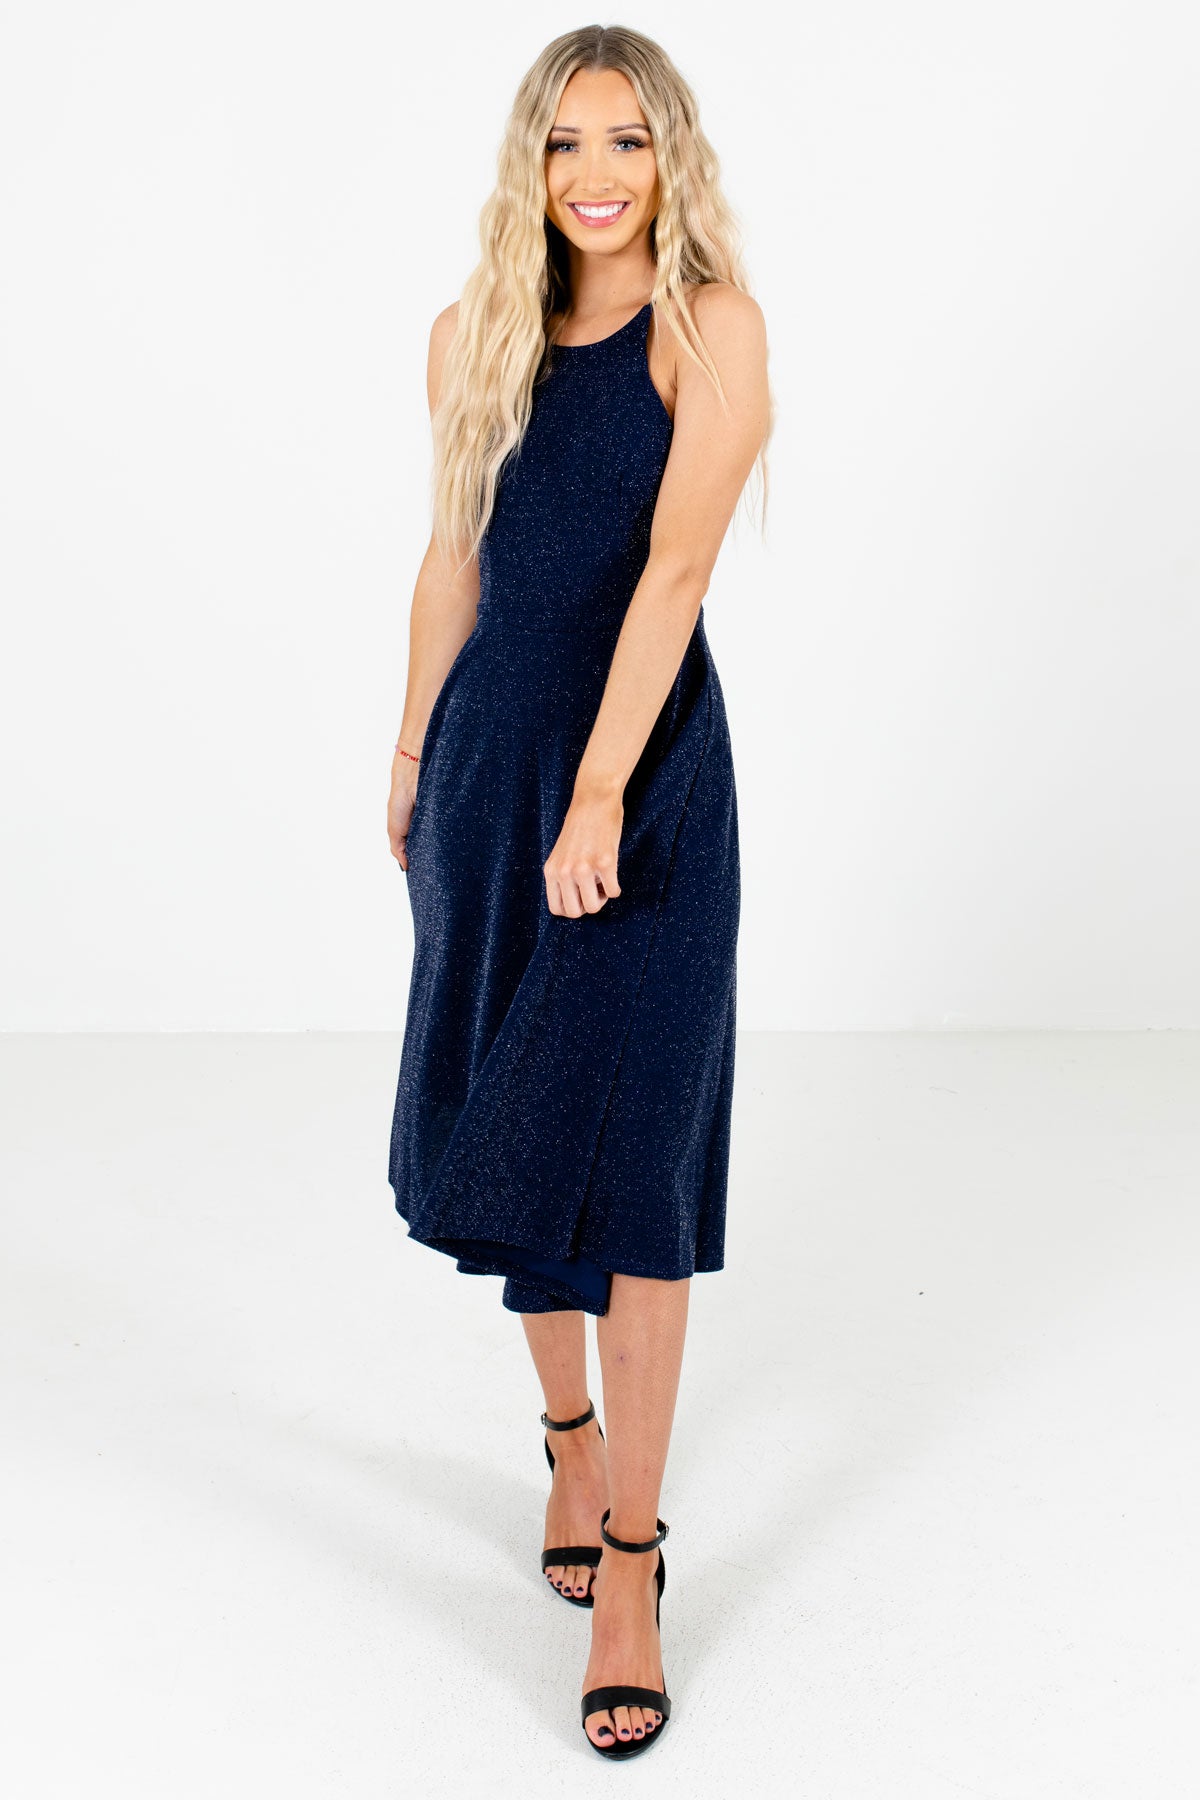 Women's Navy Blue Holiday Boutique Dresses